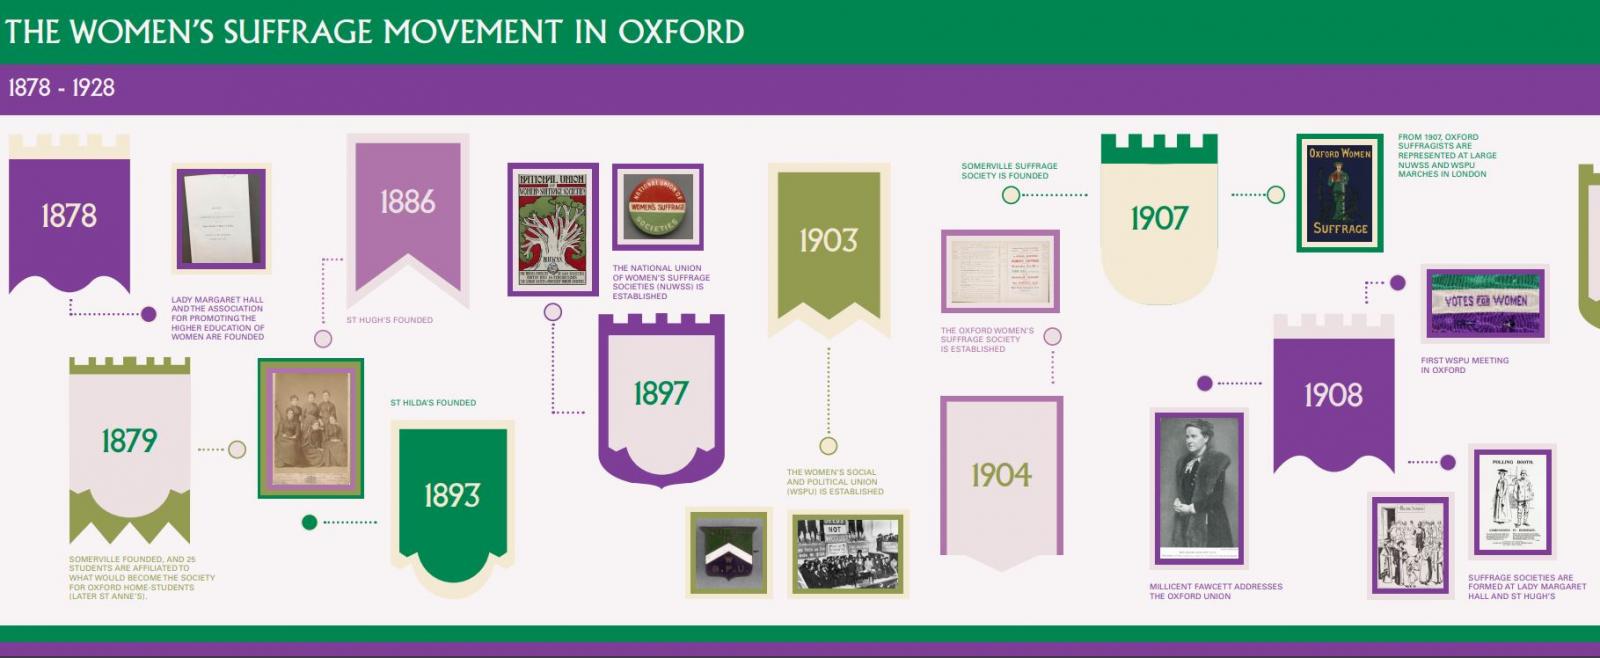 Picture of timeline showing the history of women's suffrage movement in Oxford